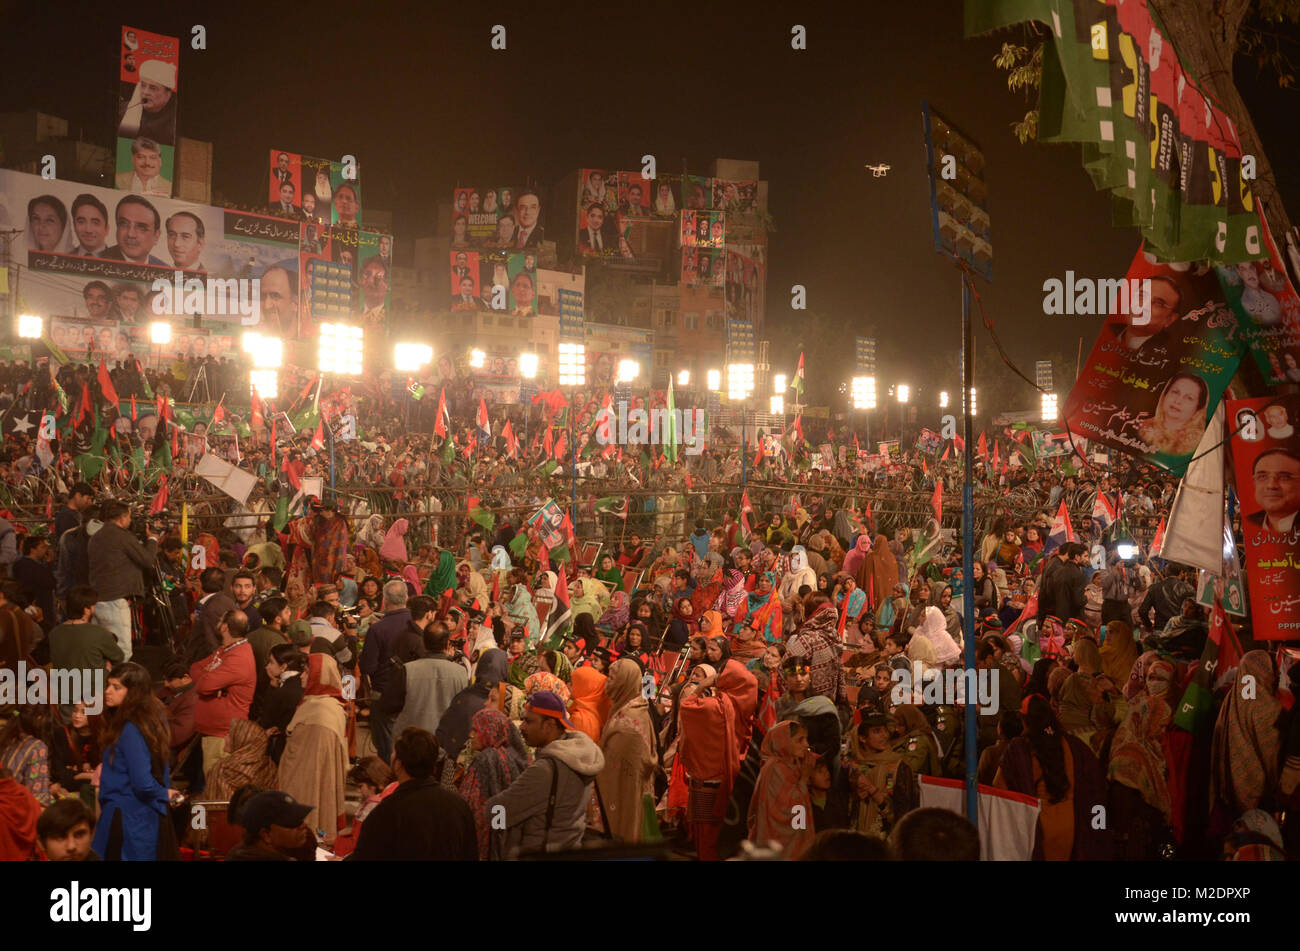 Lahore, Pakistan. 04th Feb, 2018. Pakistan Peoples' Party (PPP) Vice Chairman and former president Pakistan Asif Ali Zardari addressing a public gathering at Mochi Gate Ground on the occasion of Kashmir Solidarity Day. Kashmir Solidarity Day is observed in Pakistan on February 5 as a way of showing support for those living in Indian-administered Kashmir. Credit: Rana Sajid Hussain /Pacific Press /Alamy Live News Stock Photo